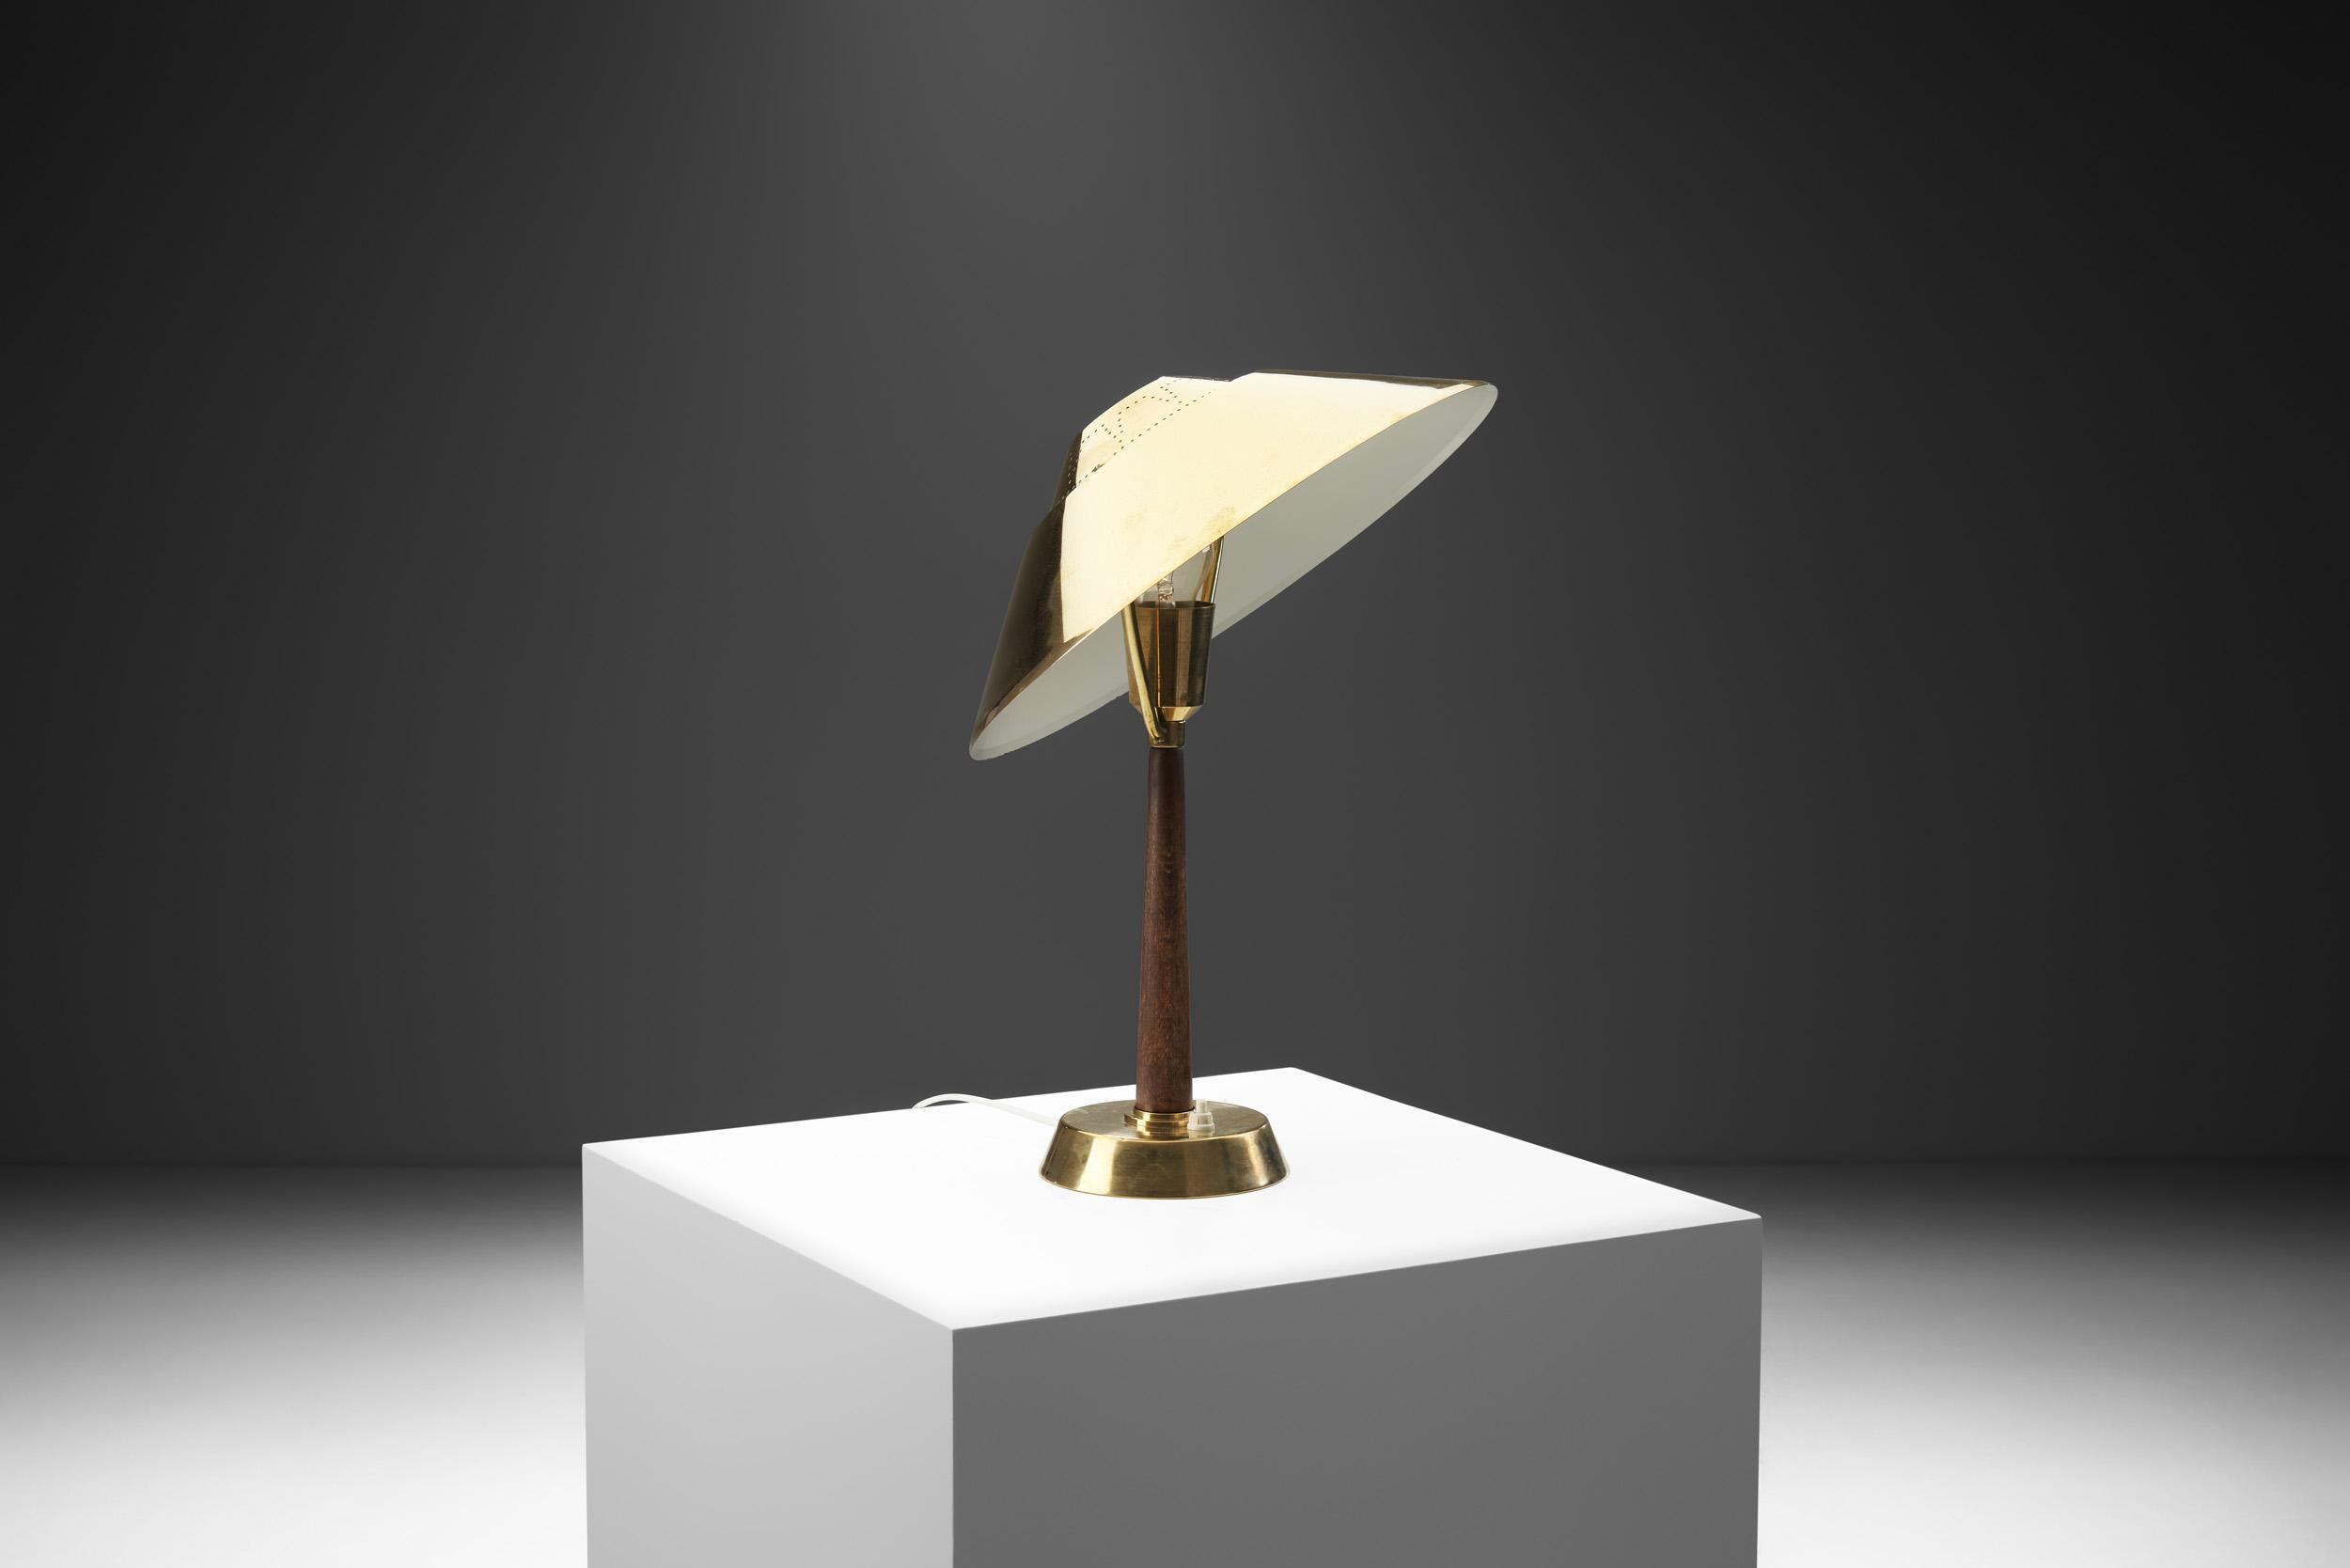 AB E. Hansson & Co. Brass Table Lamp with Adjustable Shade, Sweden 1950s In Good Condition For Sale In Utrecht, NL